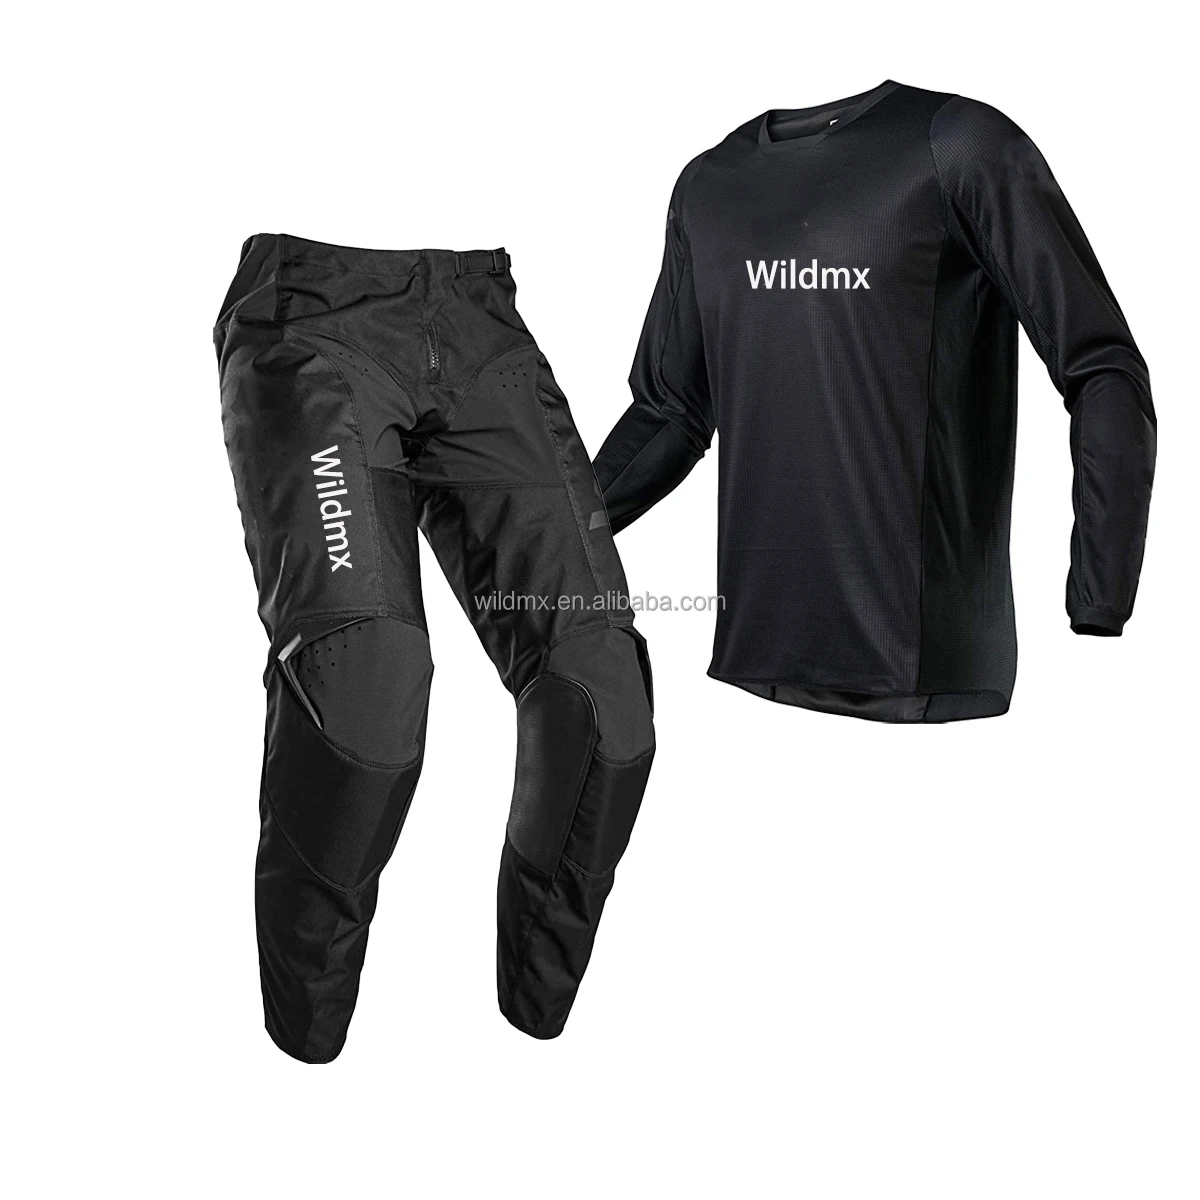 

WILDMX 2021 180 REVN Motocross Jersey And Pants MX Downhill Dirt Bike Racing Suits Mountain MTB DH Off-road Combo, Customized color